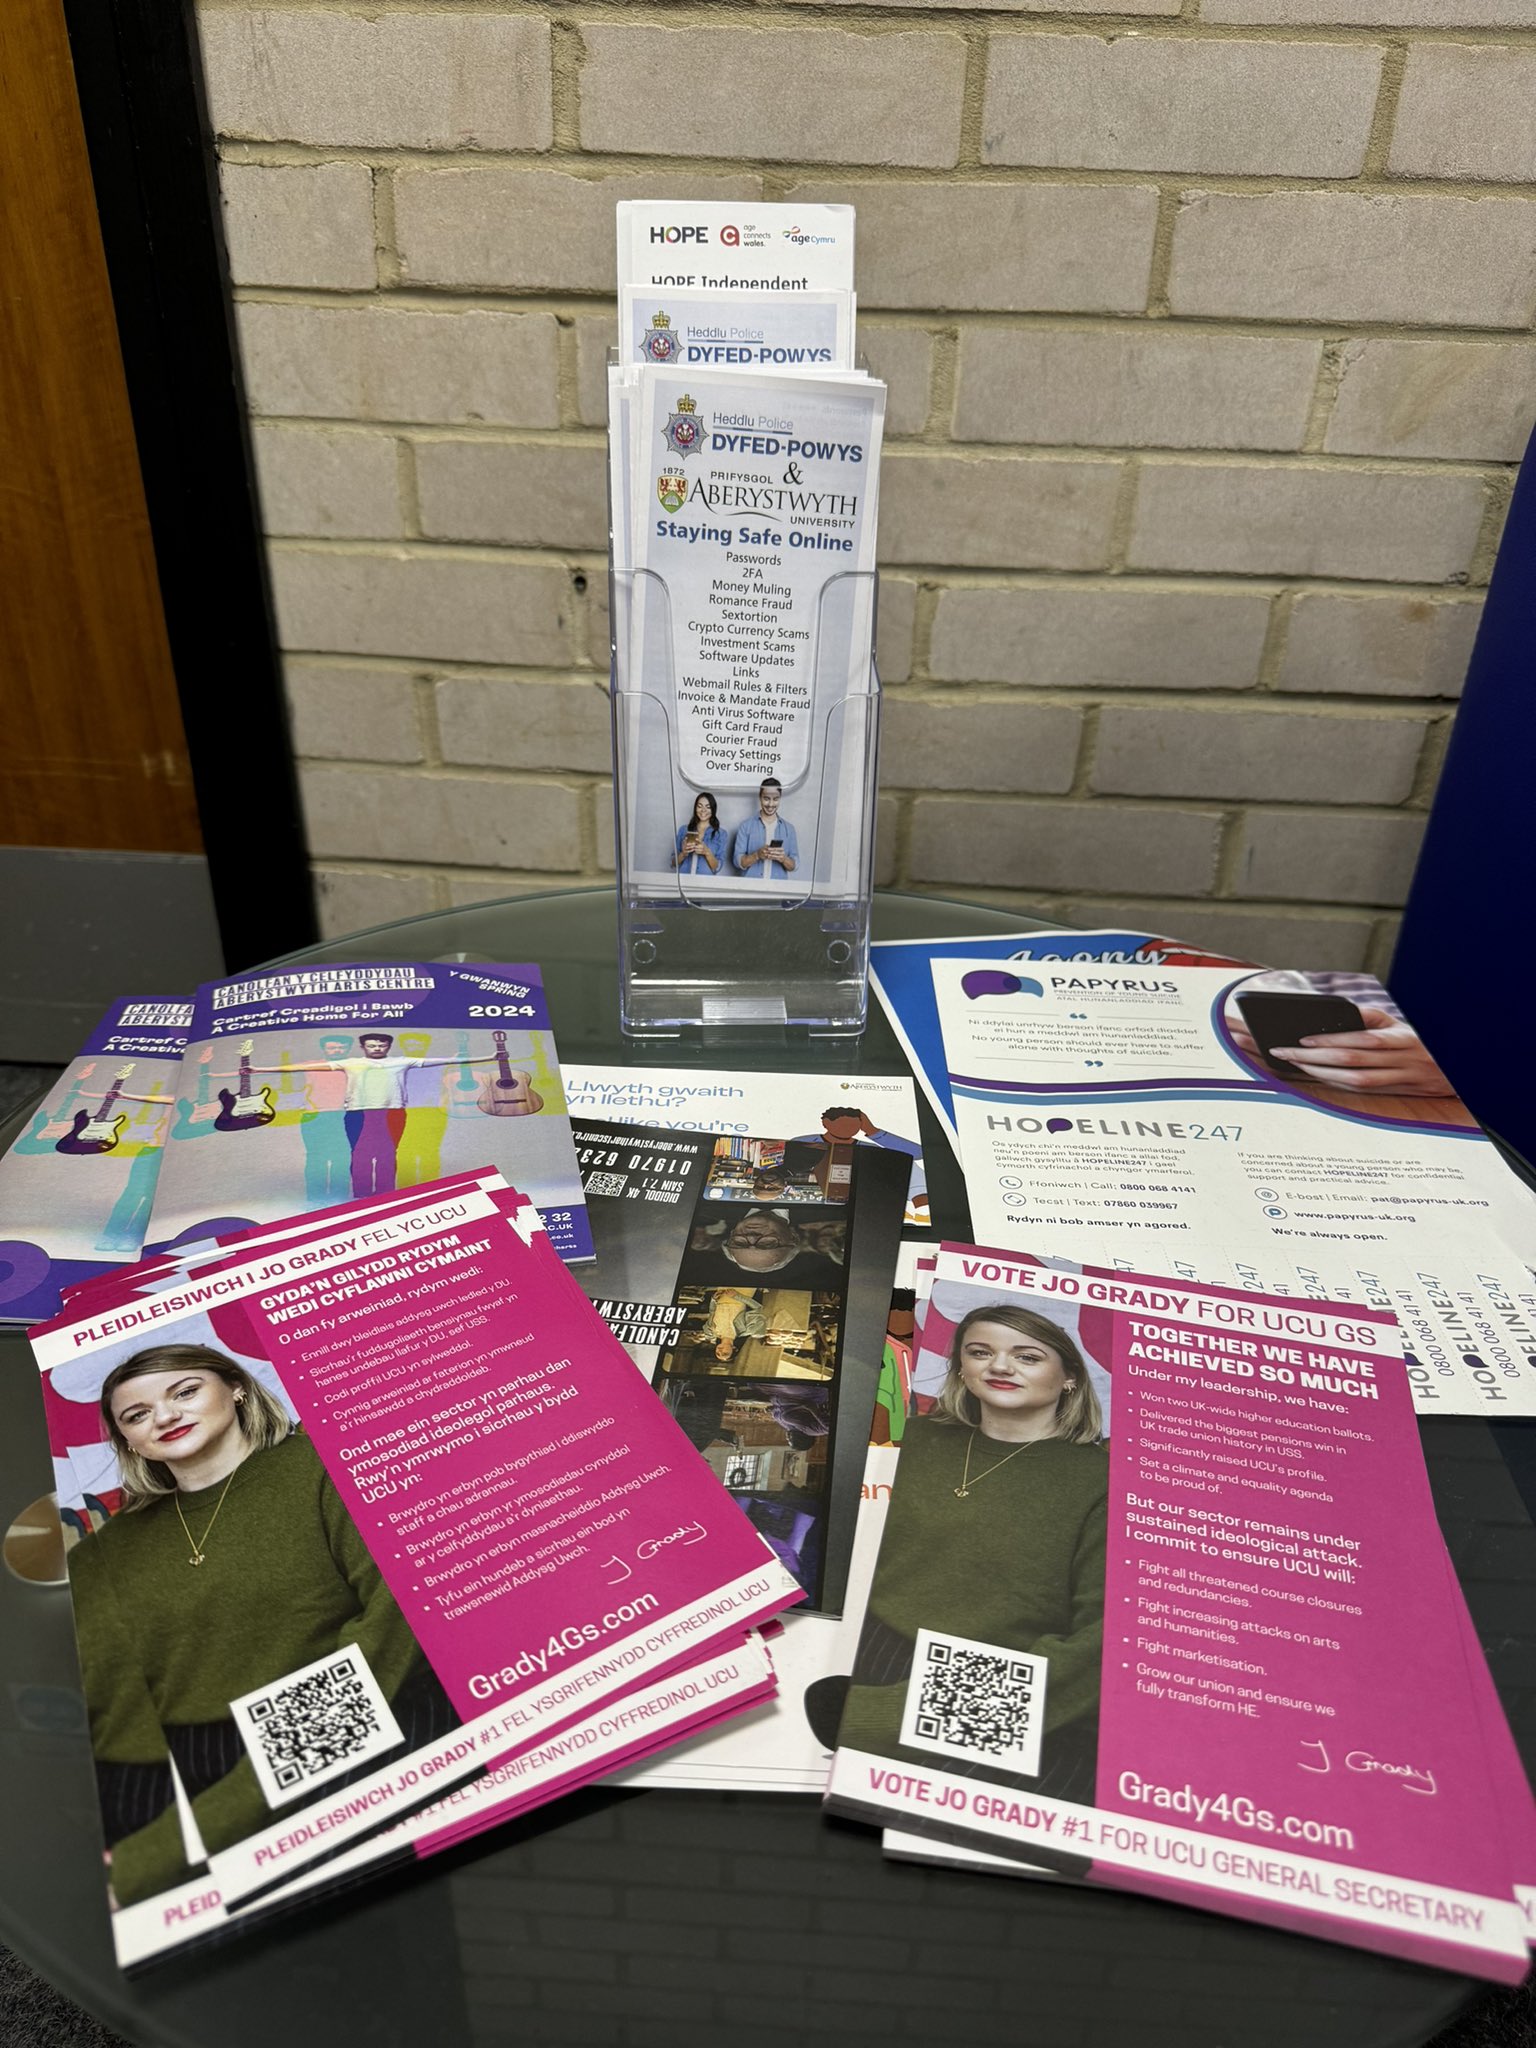 Grady4GS leaflets in English and Welsh on a table alongside other leaflets.